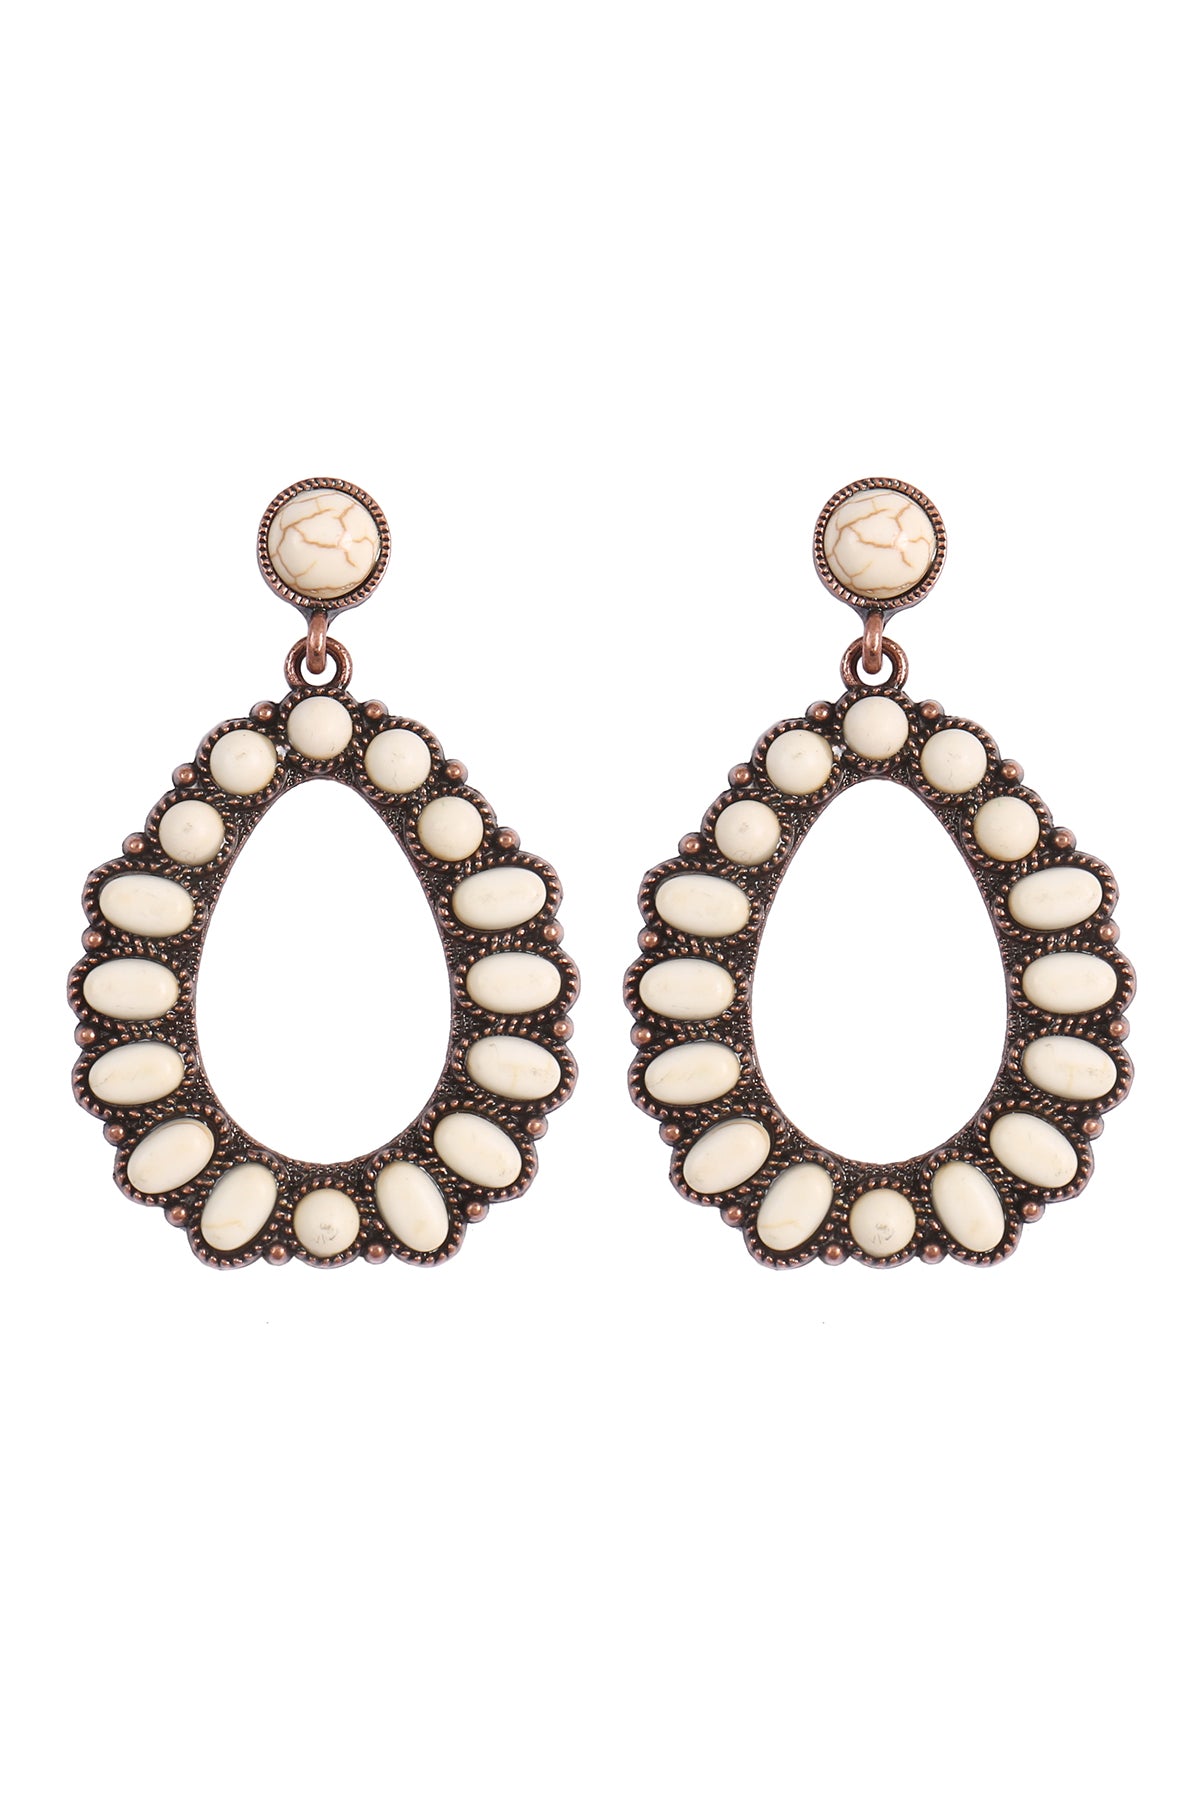 WESTERN CONCHO NATURAL STONE DROP DANGLE EARRINGS (NOW $ 4.75 ONLY!)